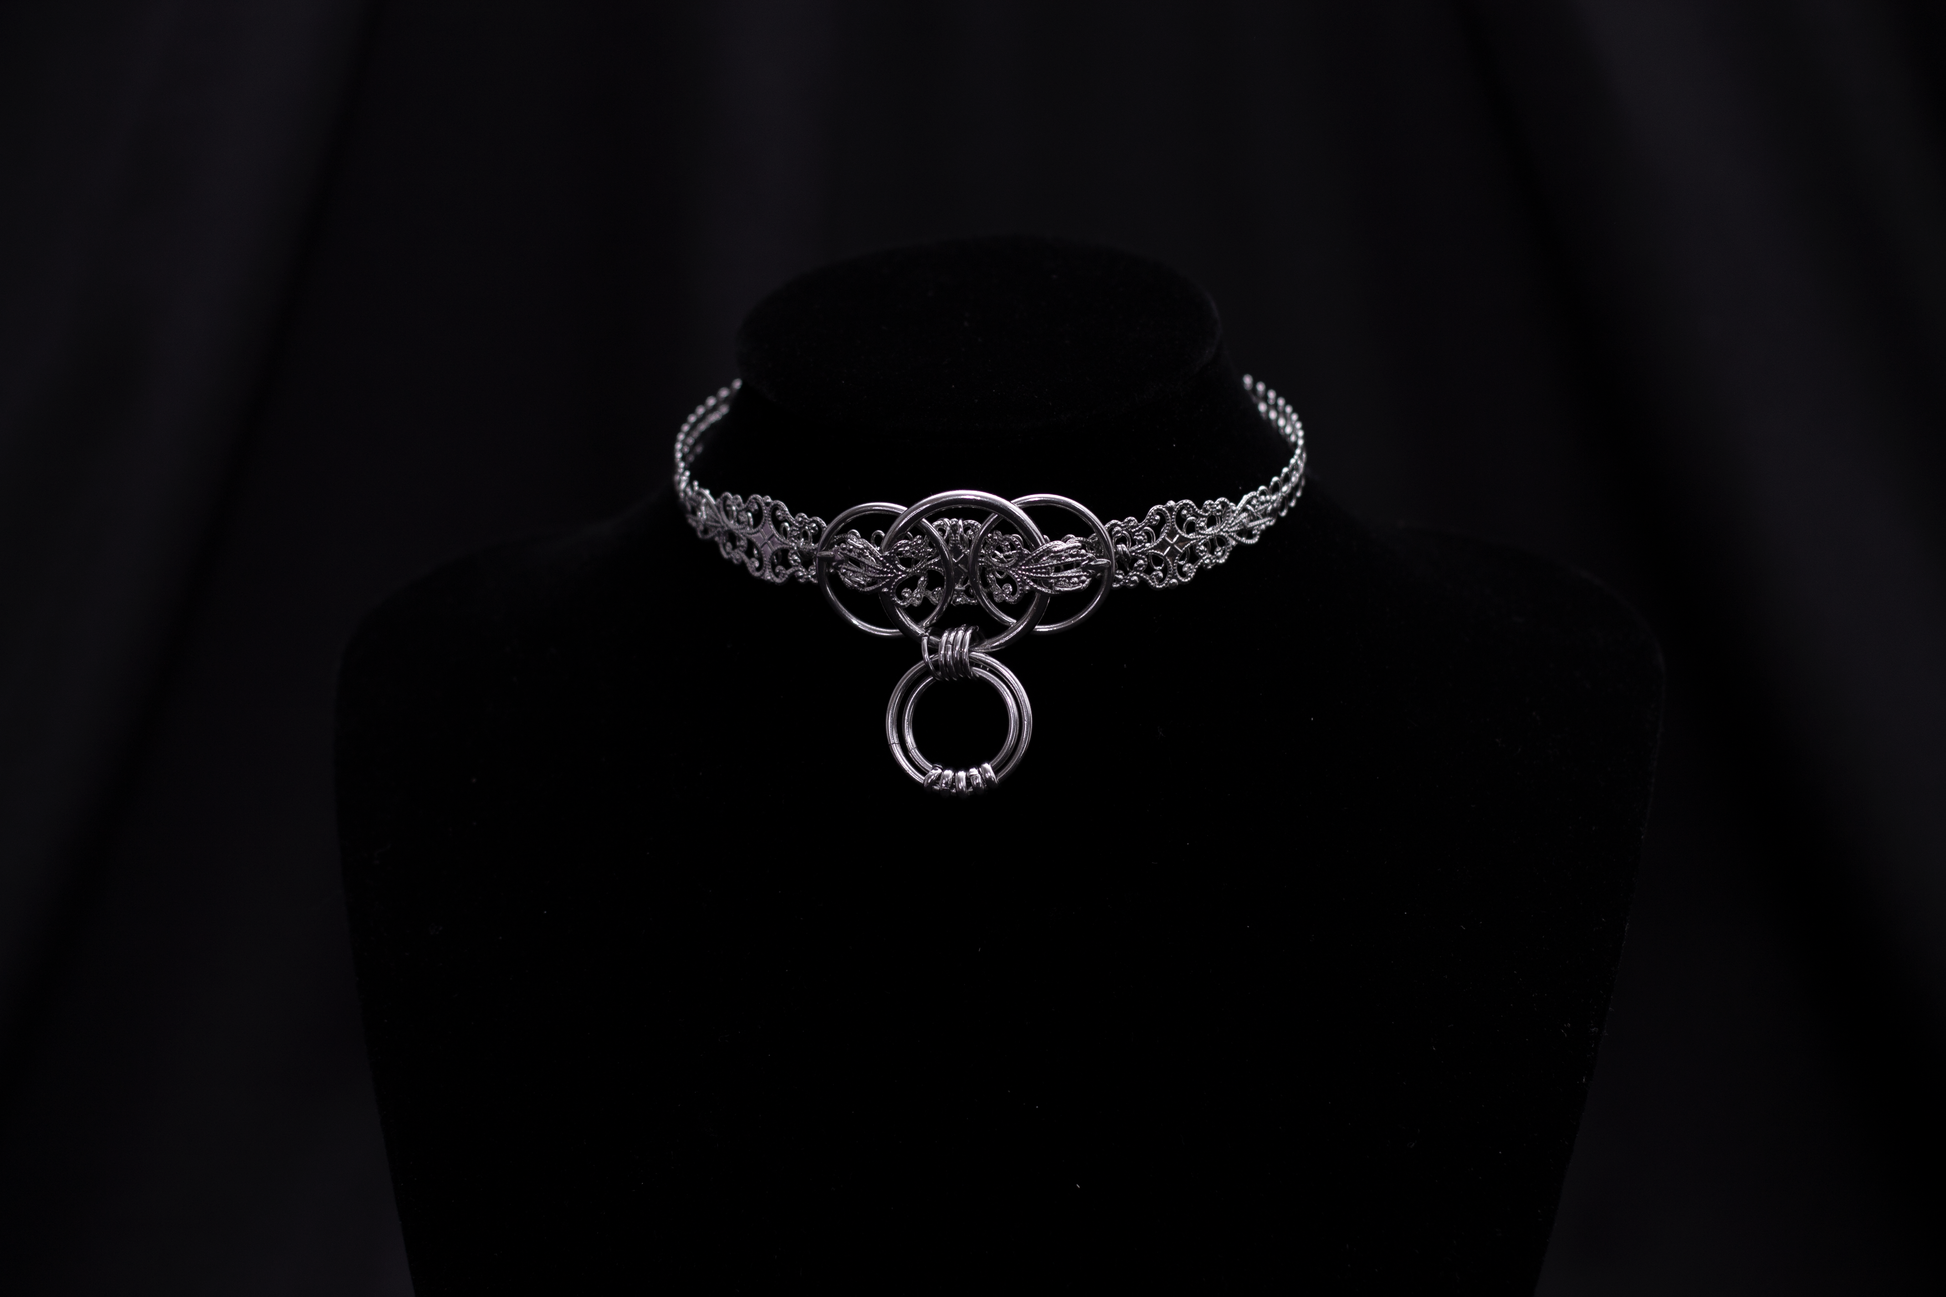 Elevate your accessory game with Myril Jewels' punk metal choker, featuring a prominent o-ring centerpiece. This exquisite piece, displayed on a black mannequin, combines intricate metalwork with a dark, polished finish, epitomizing the neo-goth aesthetic. It's an essential addition for anyone drawn to gothic-chic or witchcore styles, and versatile enough for everyday wear, Halloween, or as a standout piece for rave parties and festivals.